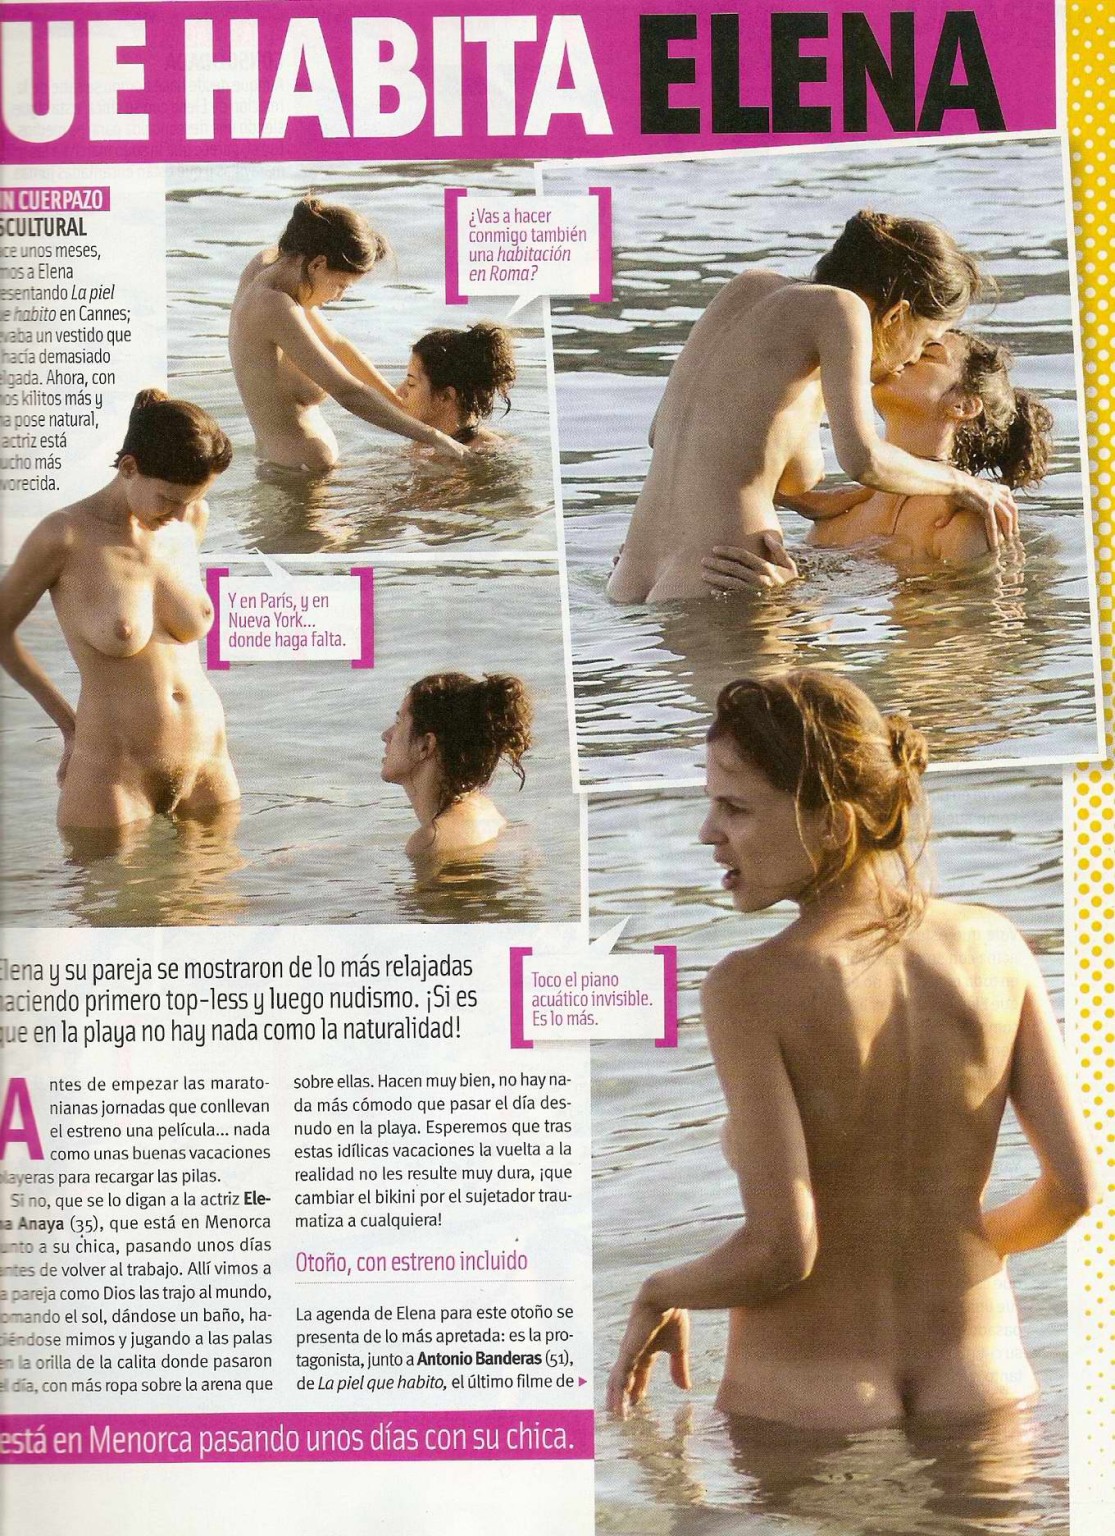 Elena Anaya making out with her busty girlfriend on a nudist beach #75289593